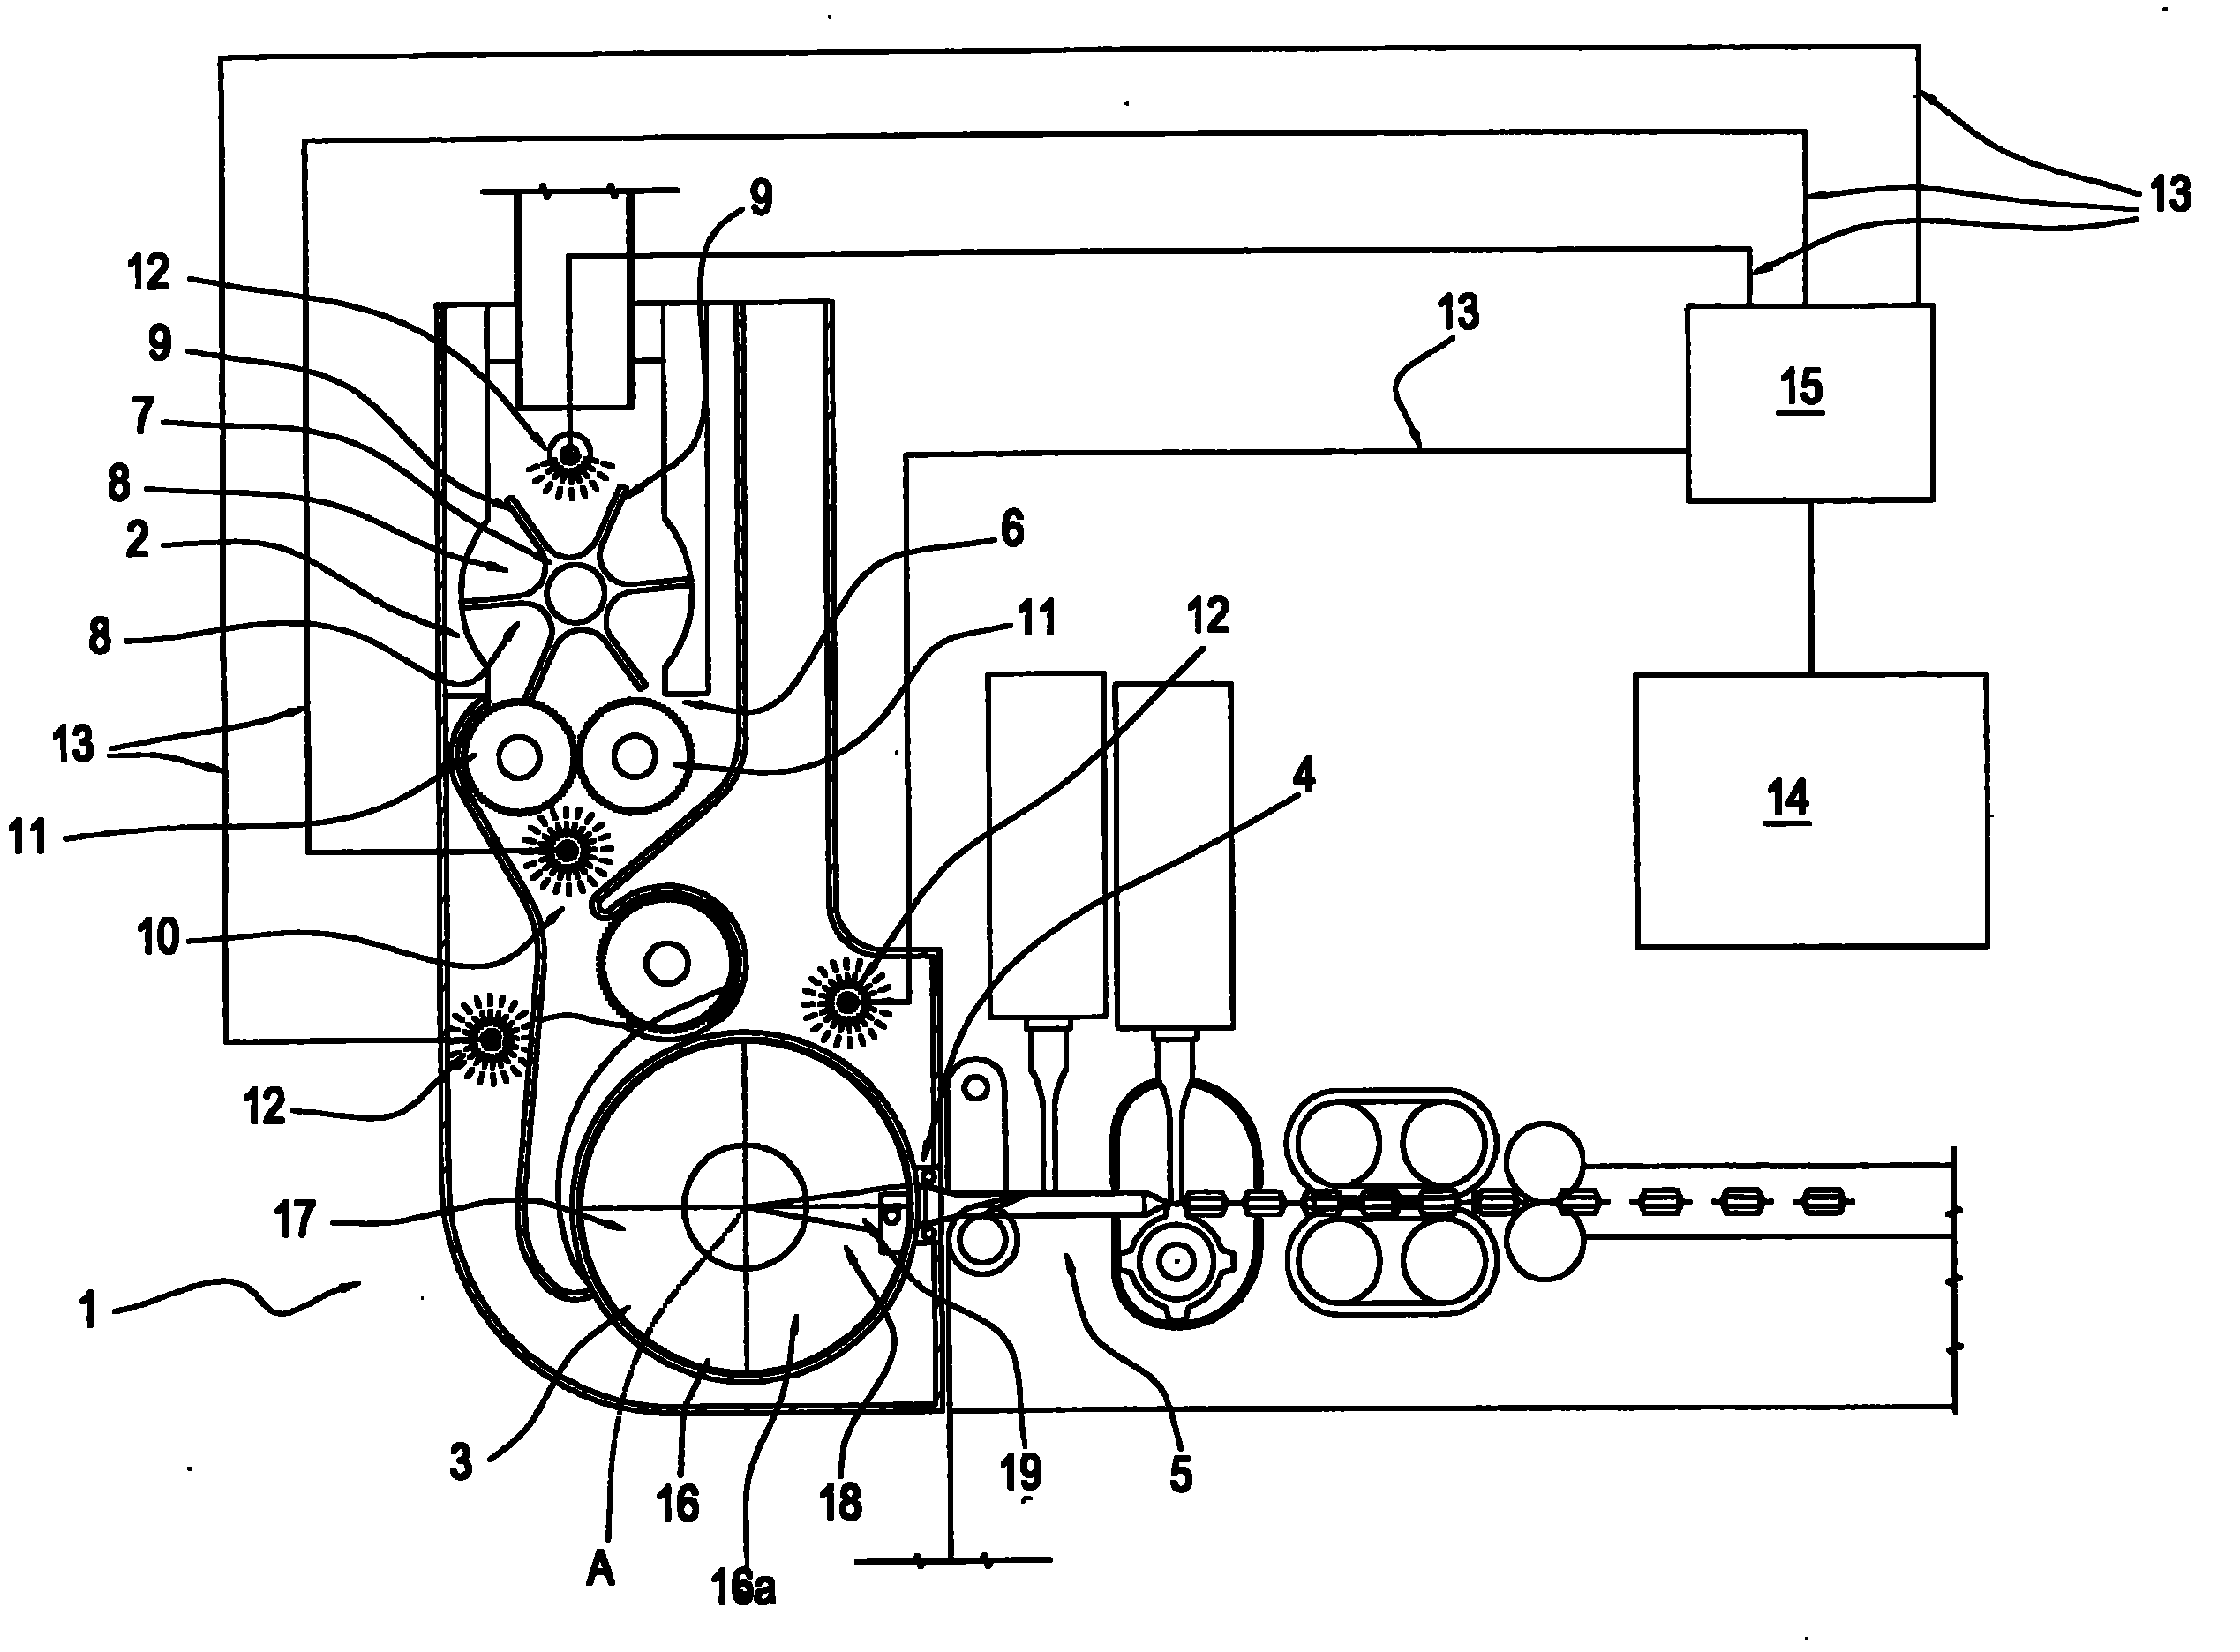 A flushing device in machines for manufacturing single pouches of cohesionless material and in systems for portioning and packaging tobacco molasses